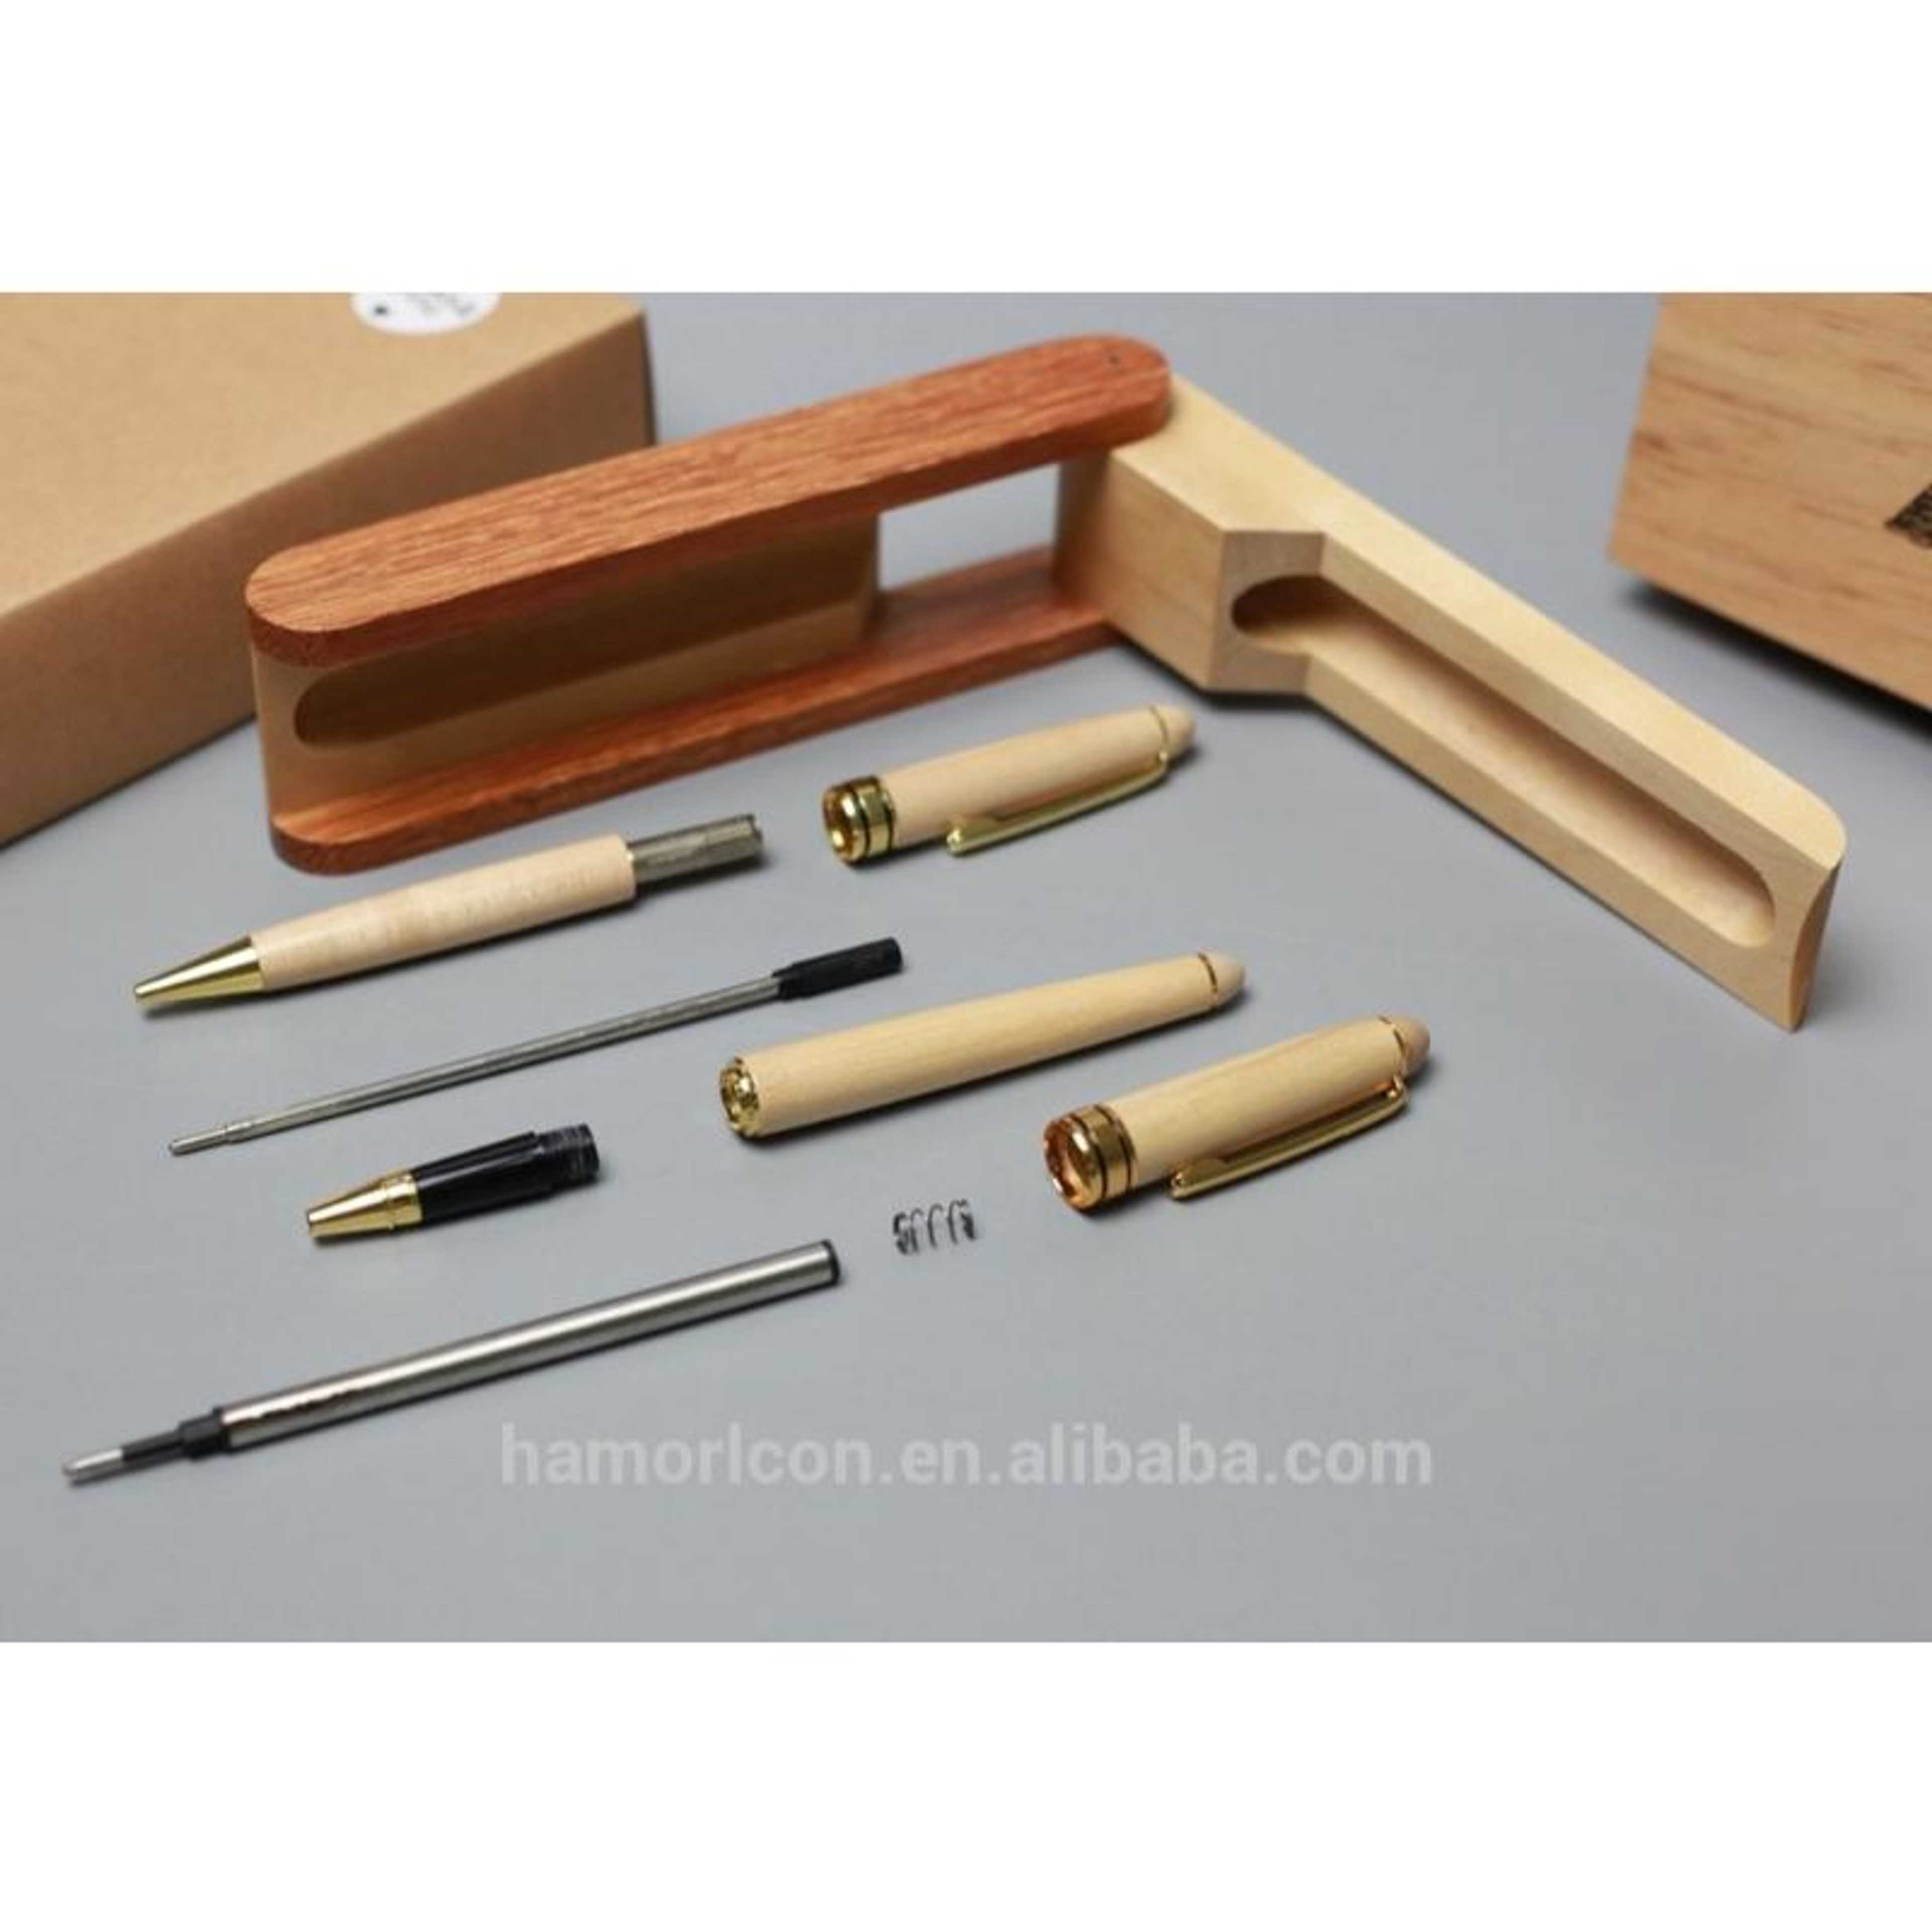 CUSTOMIZE YOUR NAME ON WOODEN BALL POINT PEN WITH WOODEN BOX